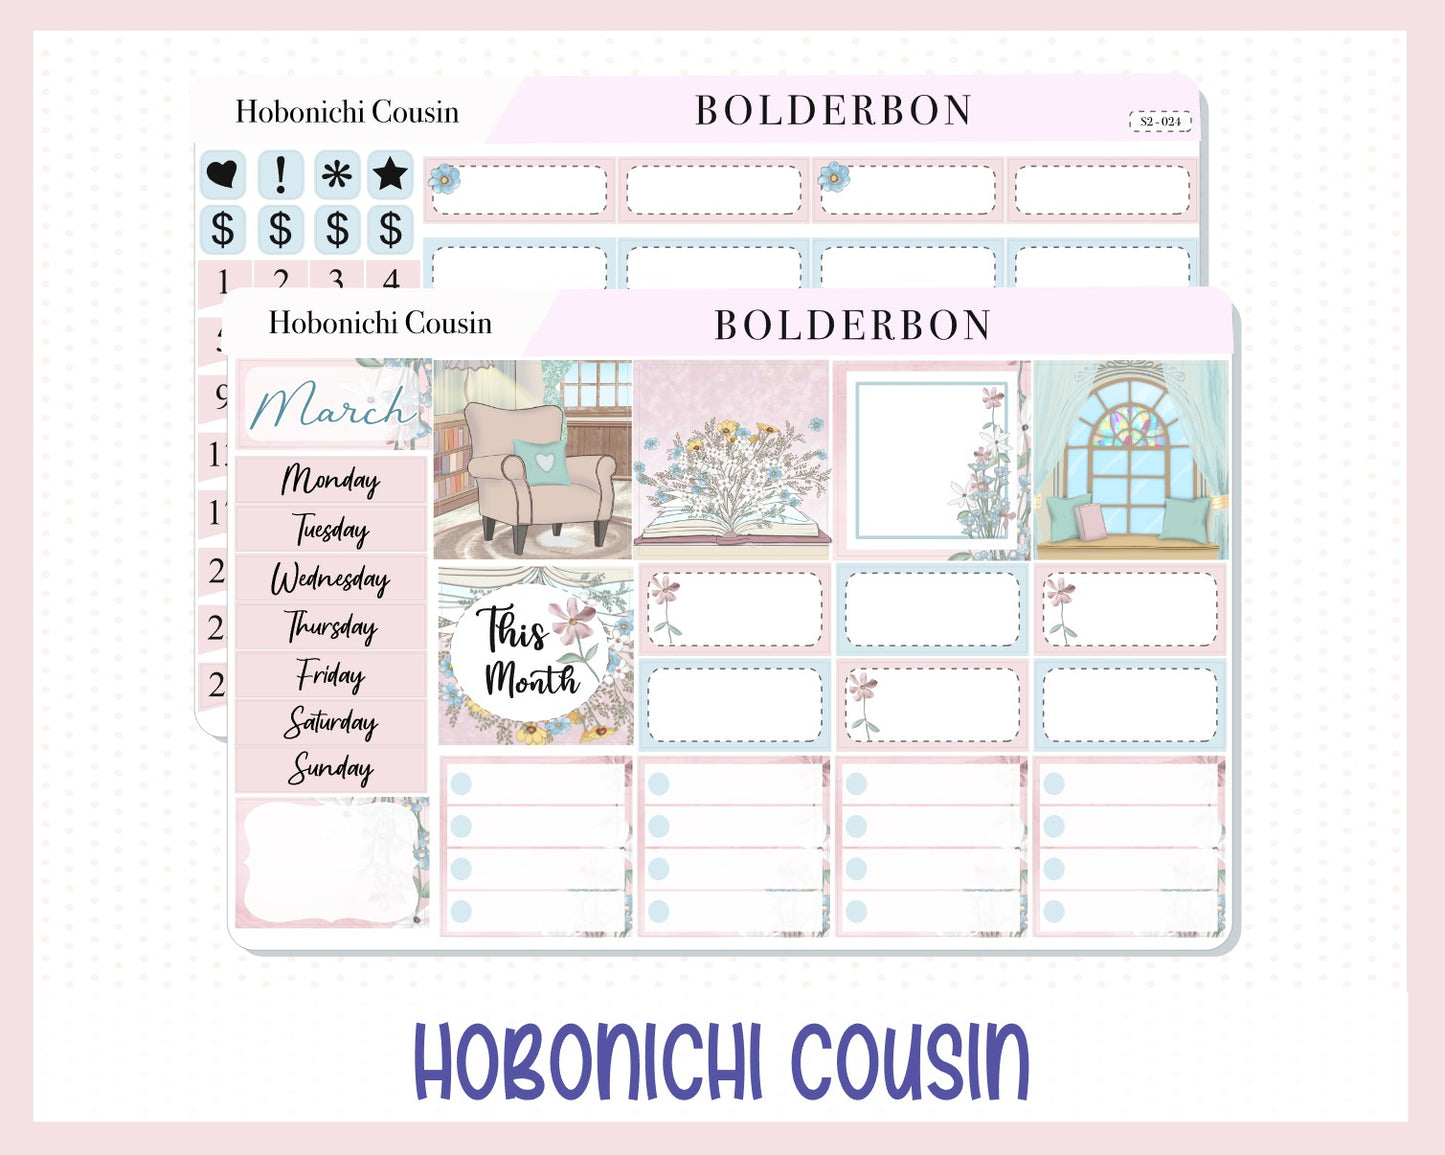 MARCH Hobonichi Cousin and A5 Day Free || Monthly Planner Sticker Kit